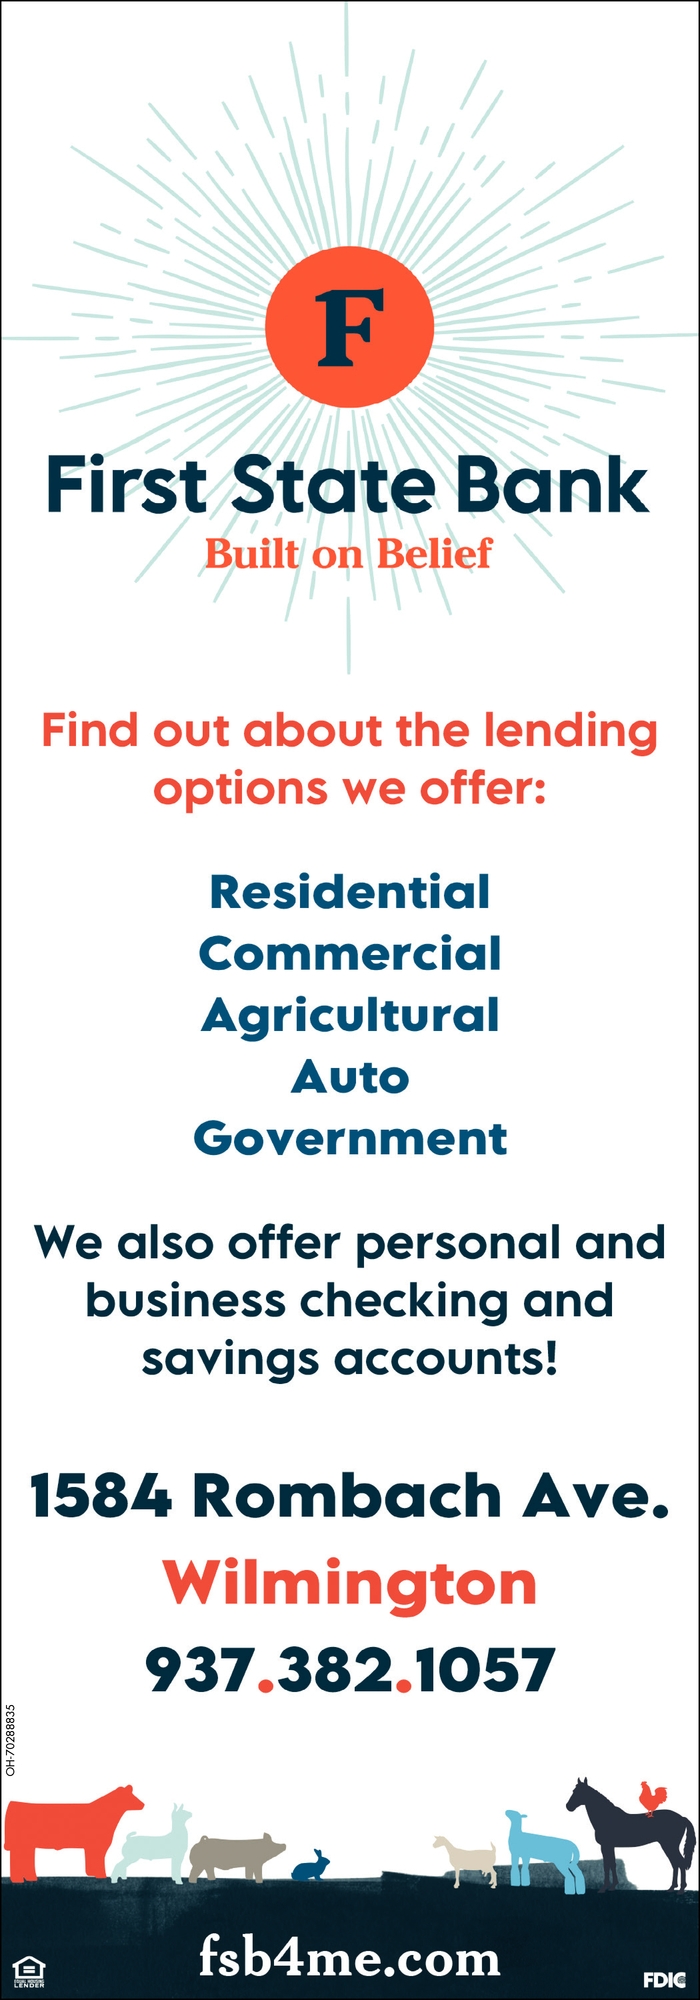 We Also Offer Personal and Business Checking